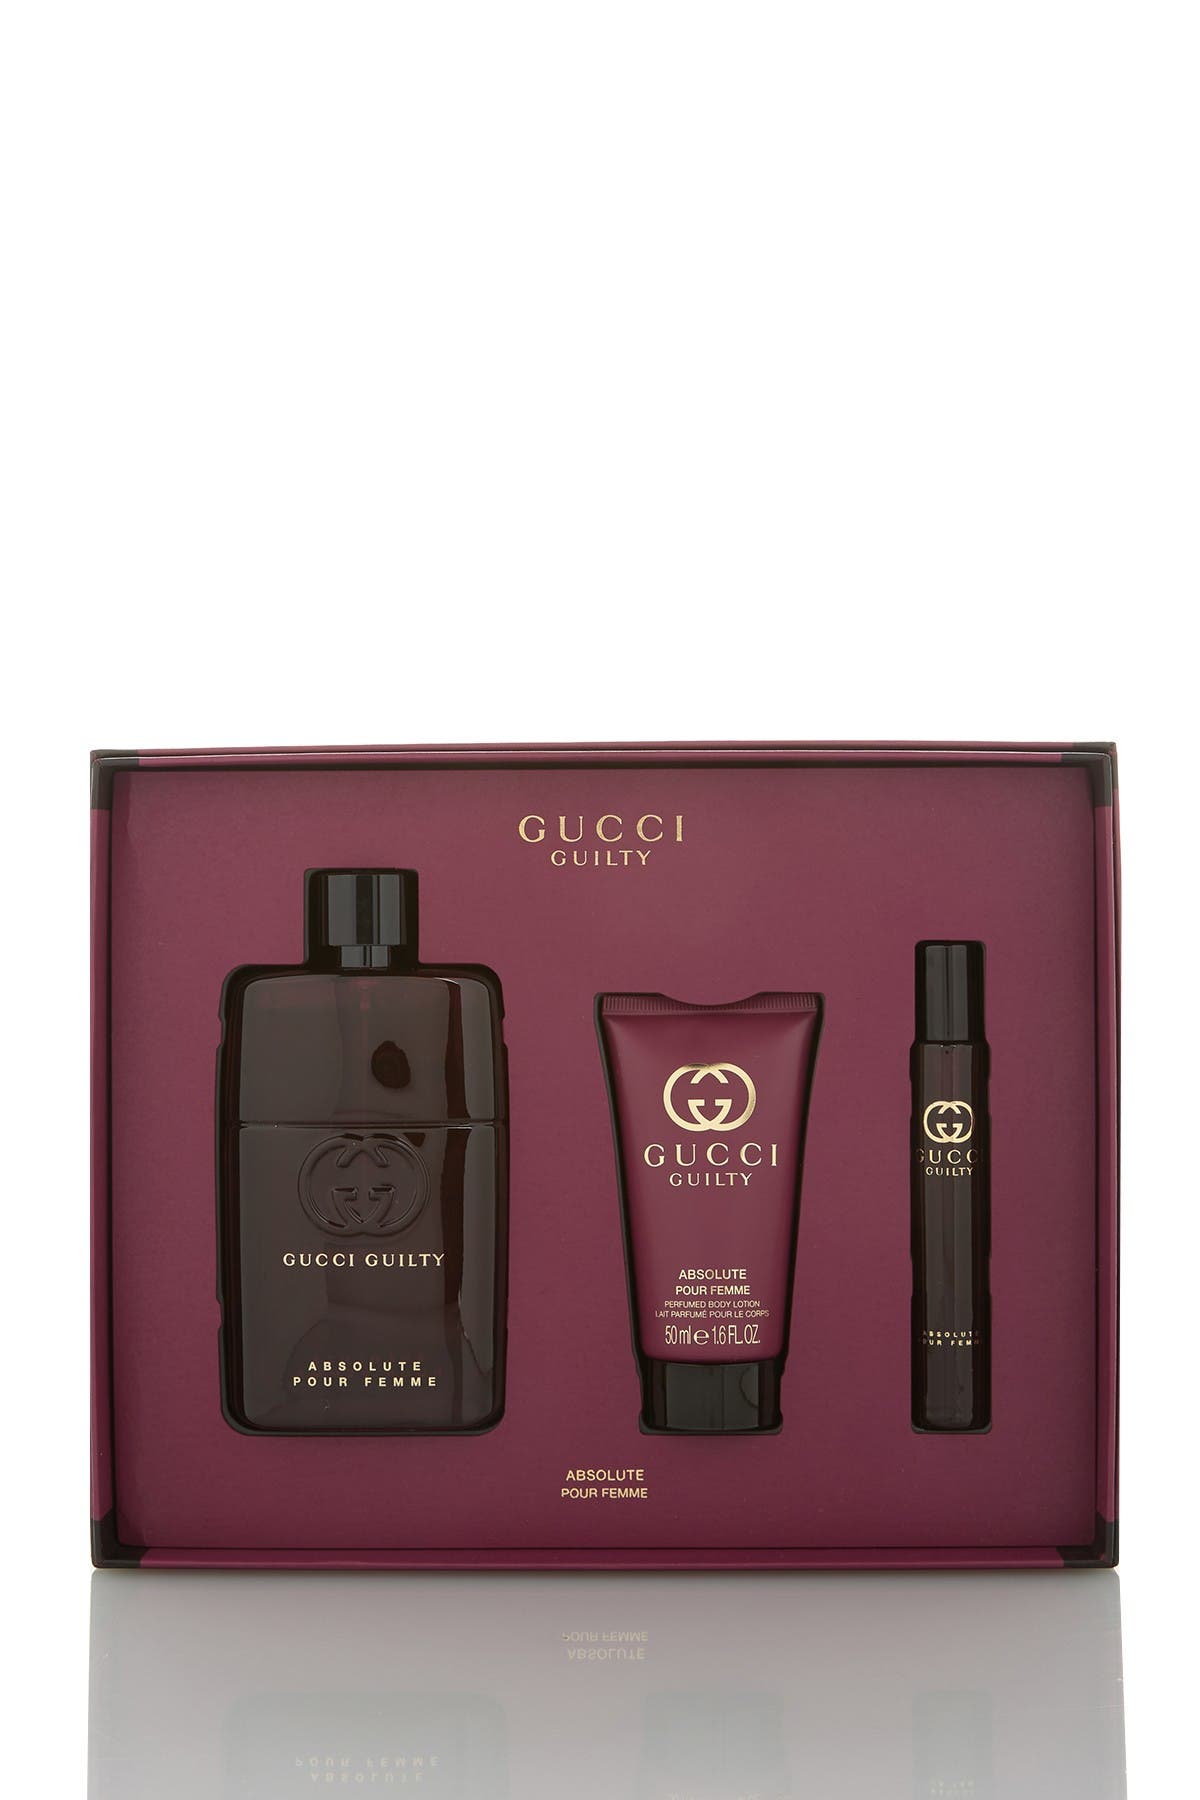 gucci guilty absolute femme